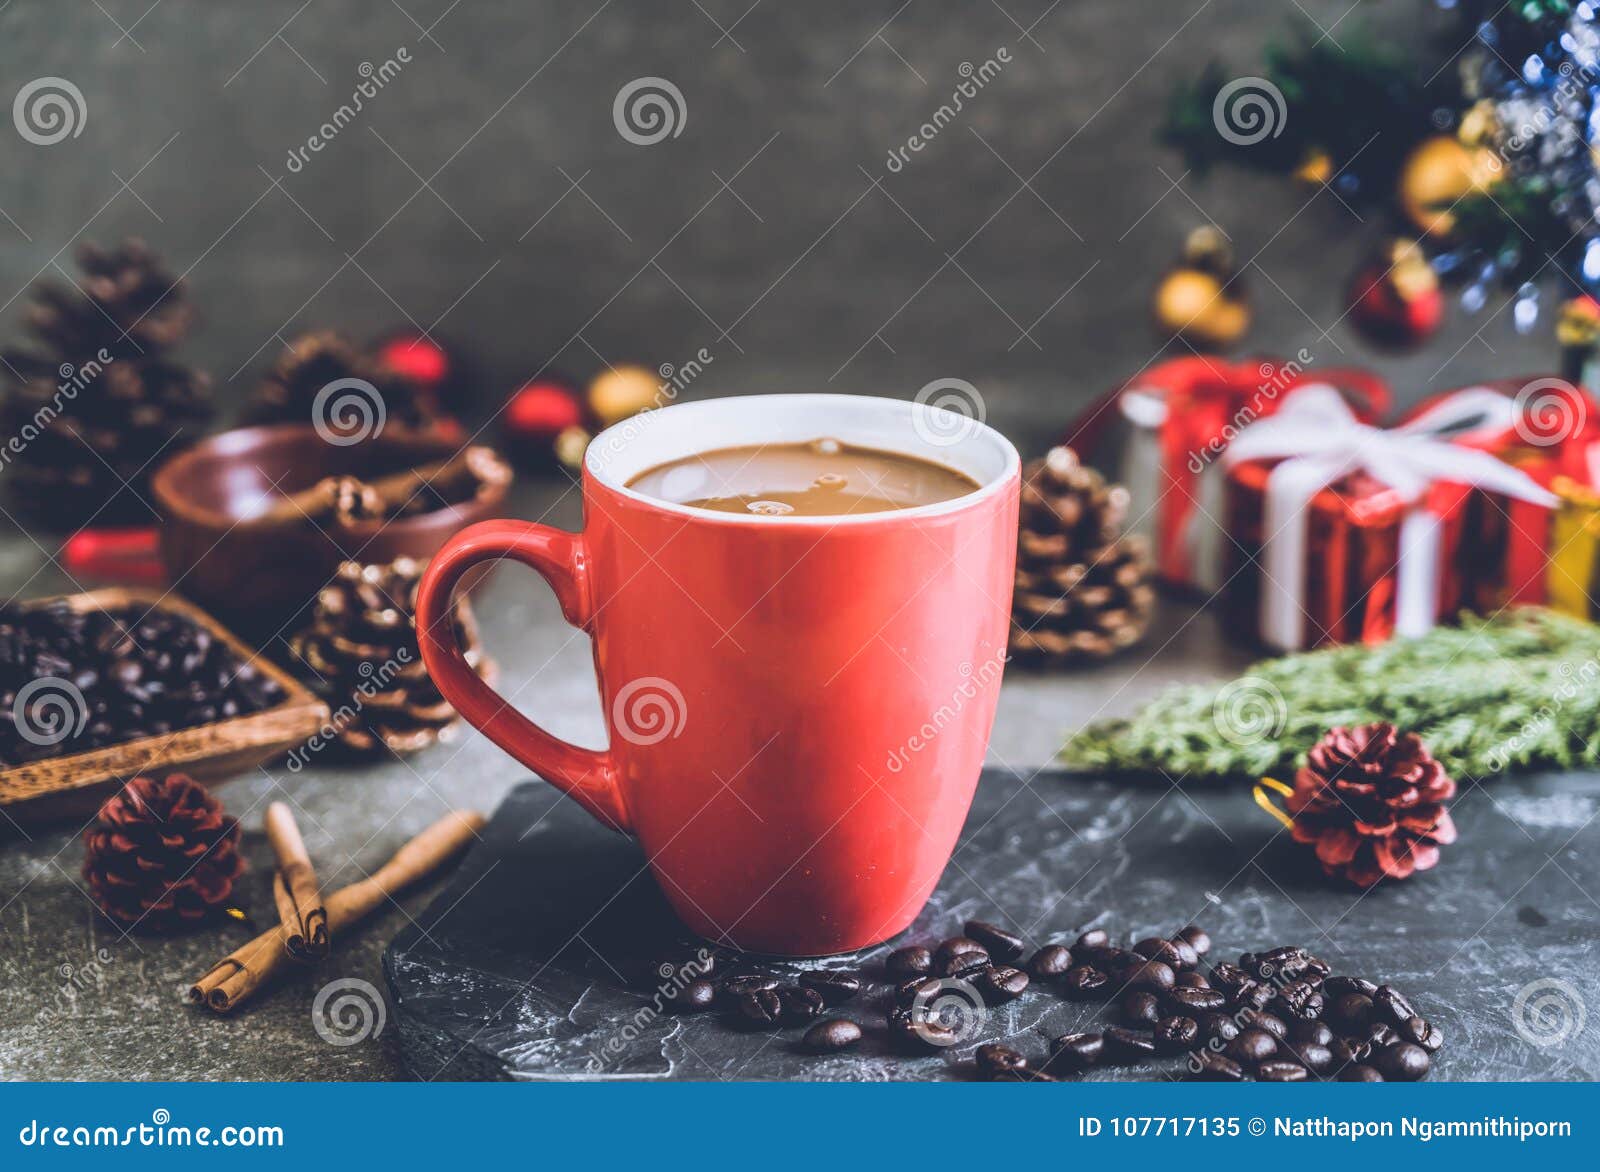 Hot Coffee Cup with Christmas Decoration Stock Image - Image of cocoa ...